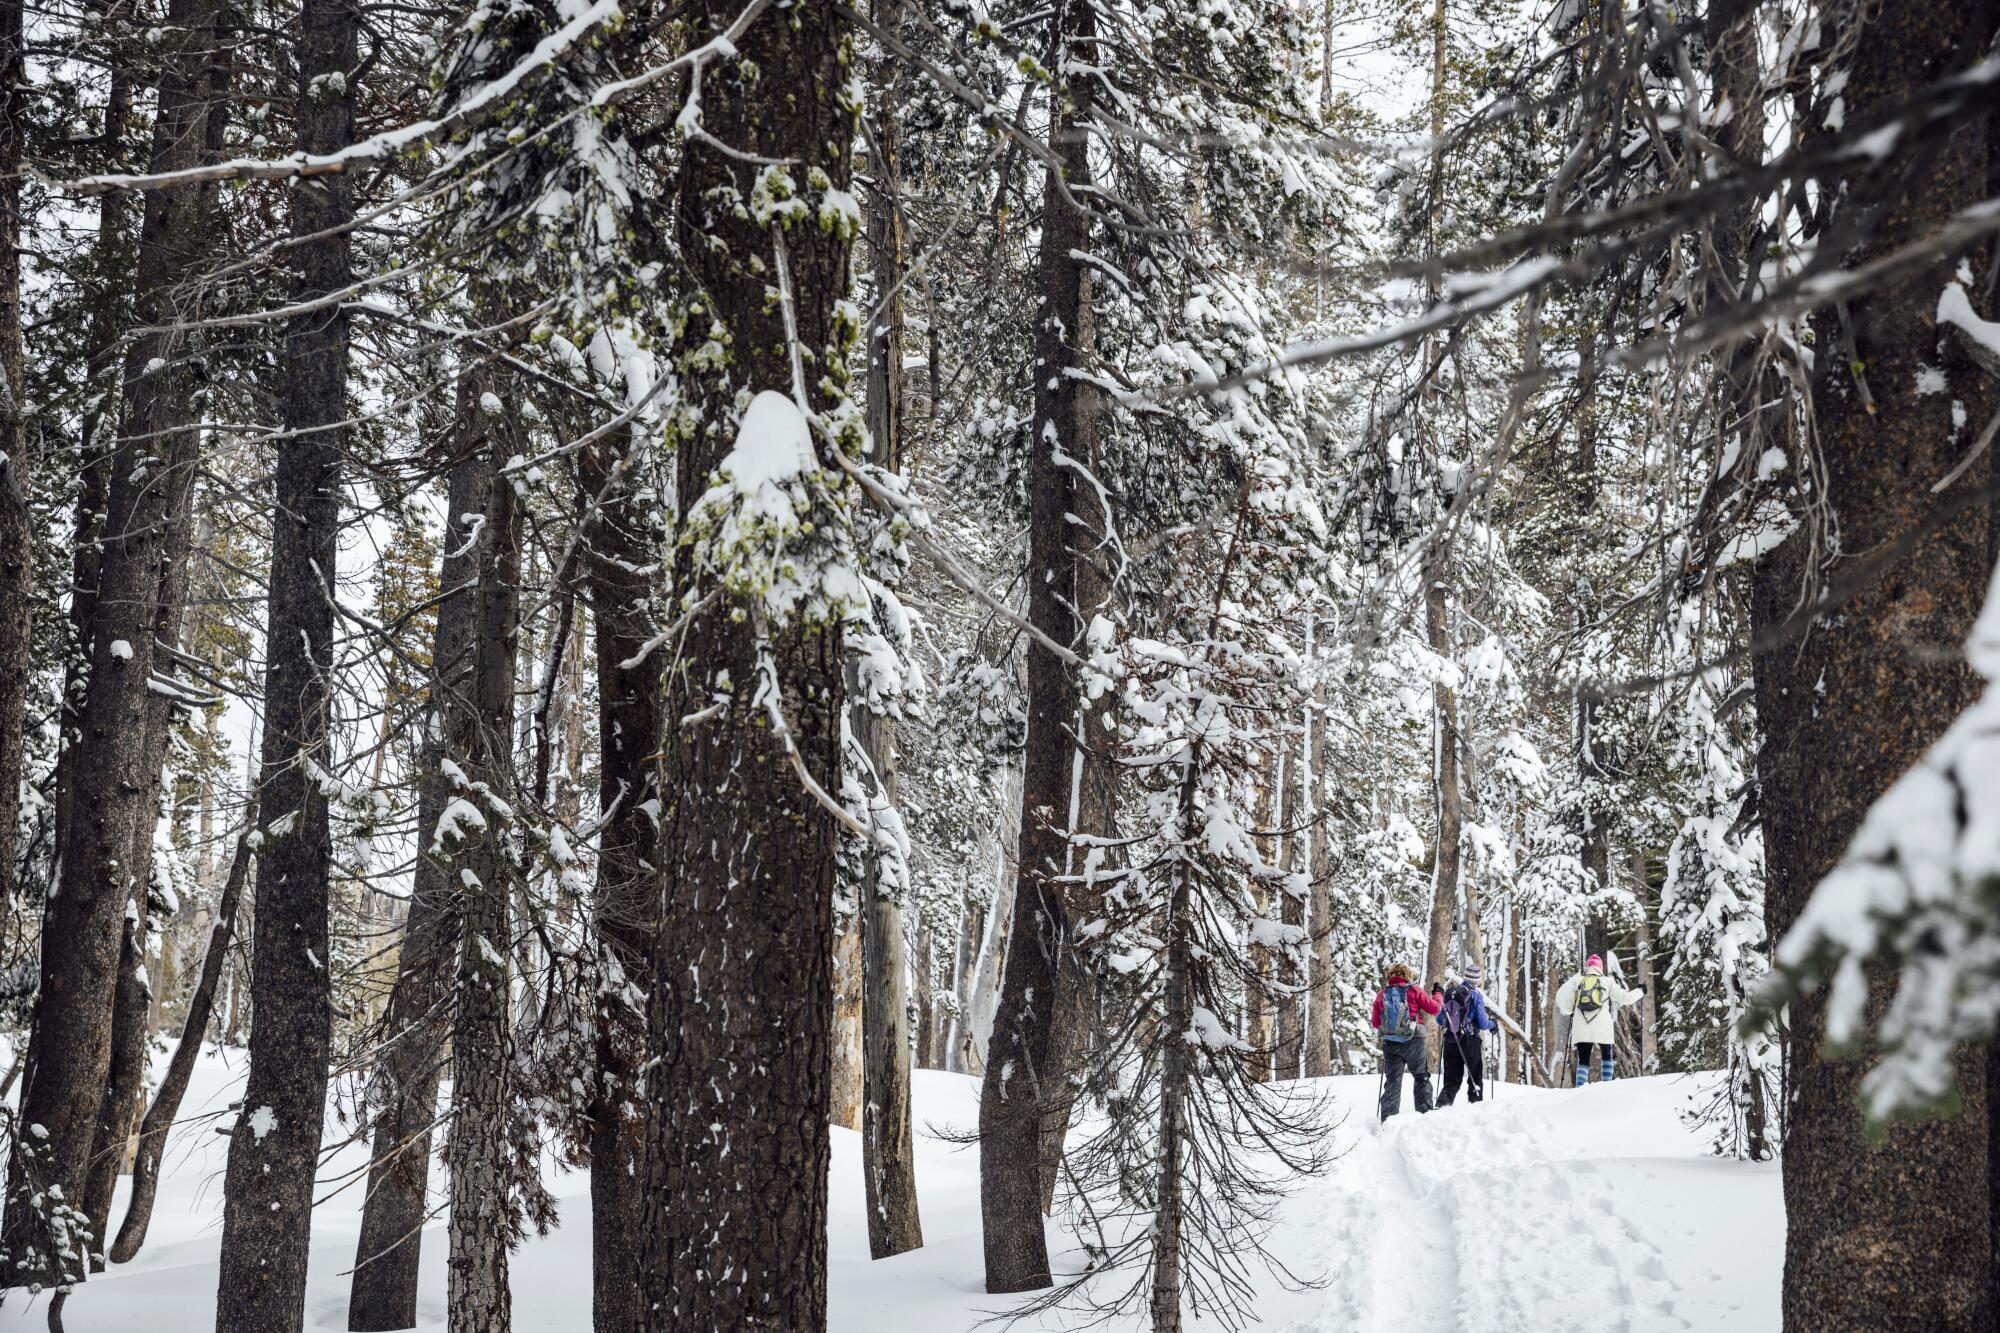 People snowshoe along the Pacific Crest Trail at Donner Summit California State Snopark in Soda Springs on Jan. 12.